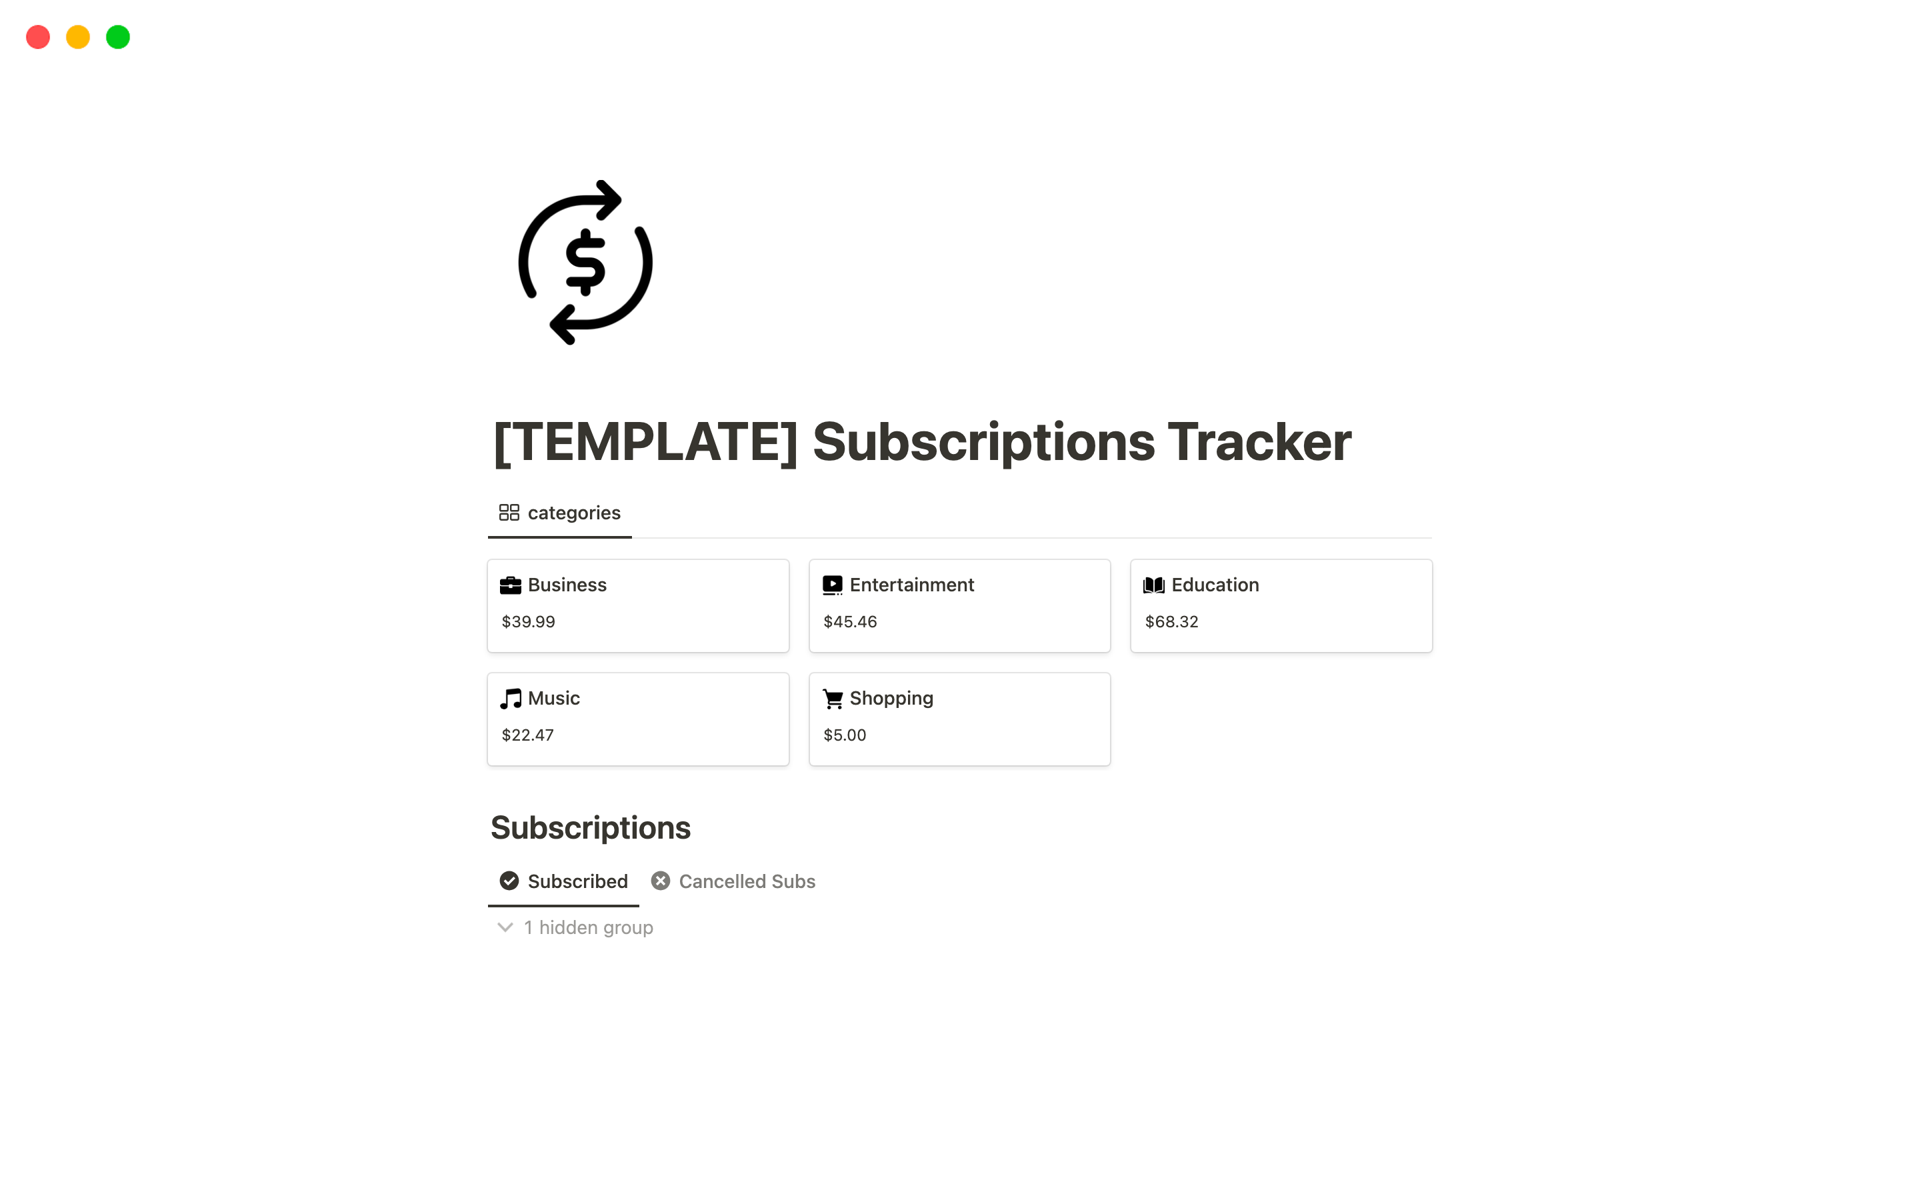 keep track of your subscriptions, renewals, and cancellations 